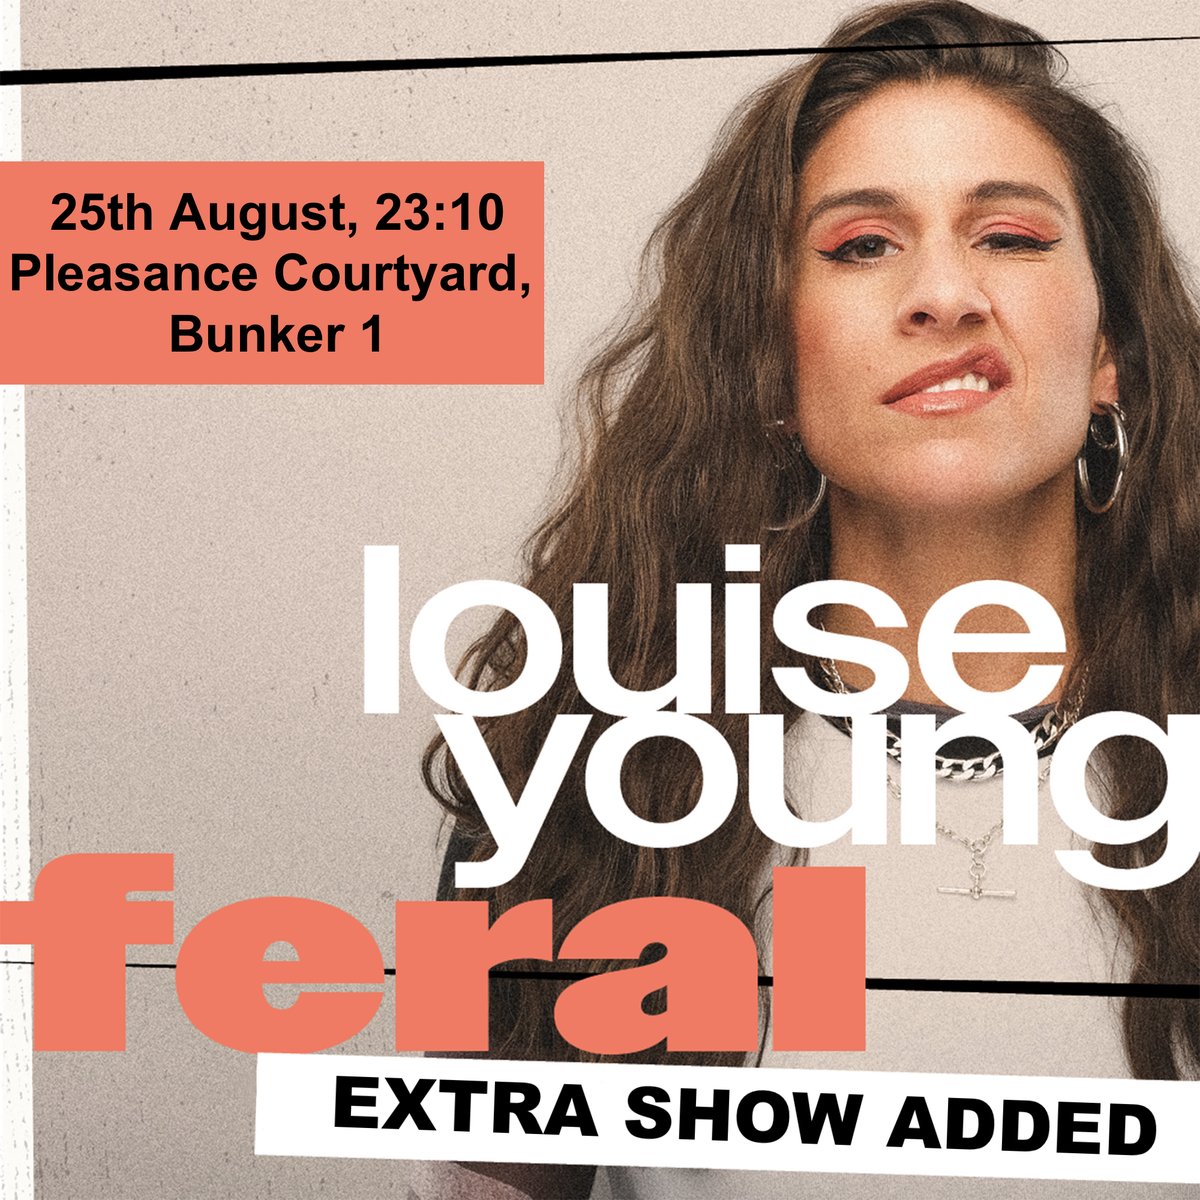 🚨EXTRA SHOW ADDED🚨 Due to exceptional demand, we've added an extra date to Louise Young: Feral! Get tickets to @LouiseYoung_'s show now before it's too late! EXTRA SHOW 🗓️Friday 25th August, 23:10 📍Pleasance Courtyard, Bunker 1 🎟️ pleasance.co.uk/event/louise-y…